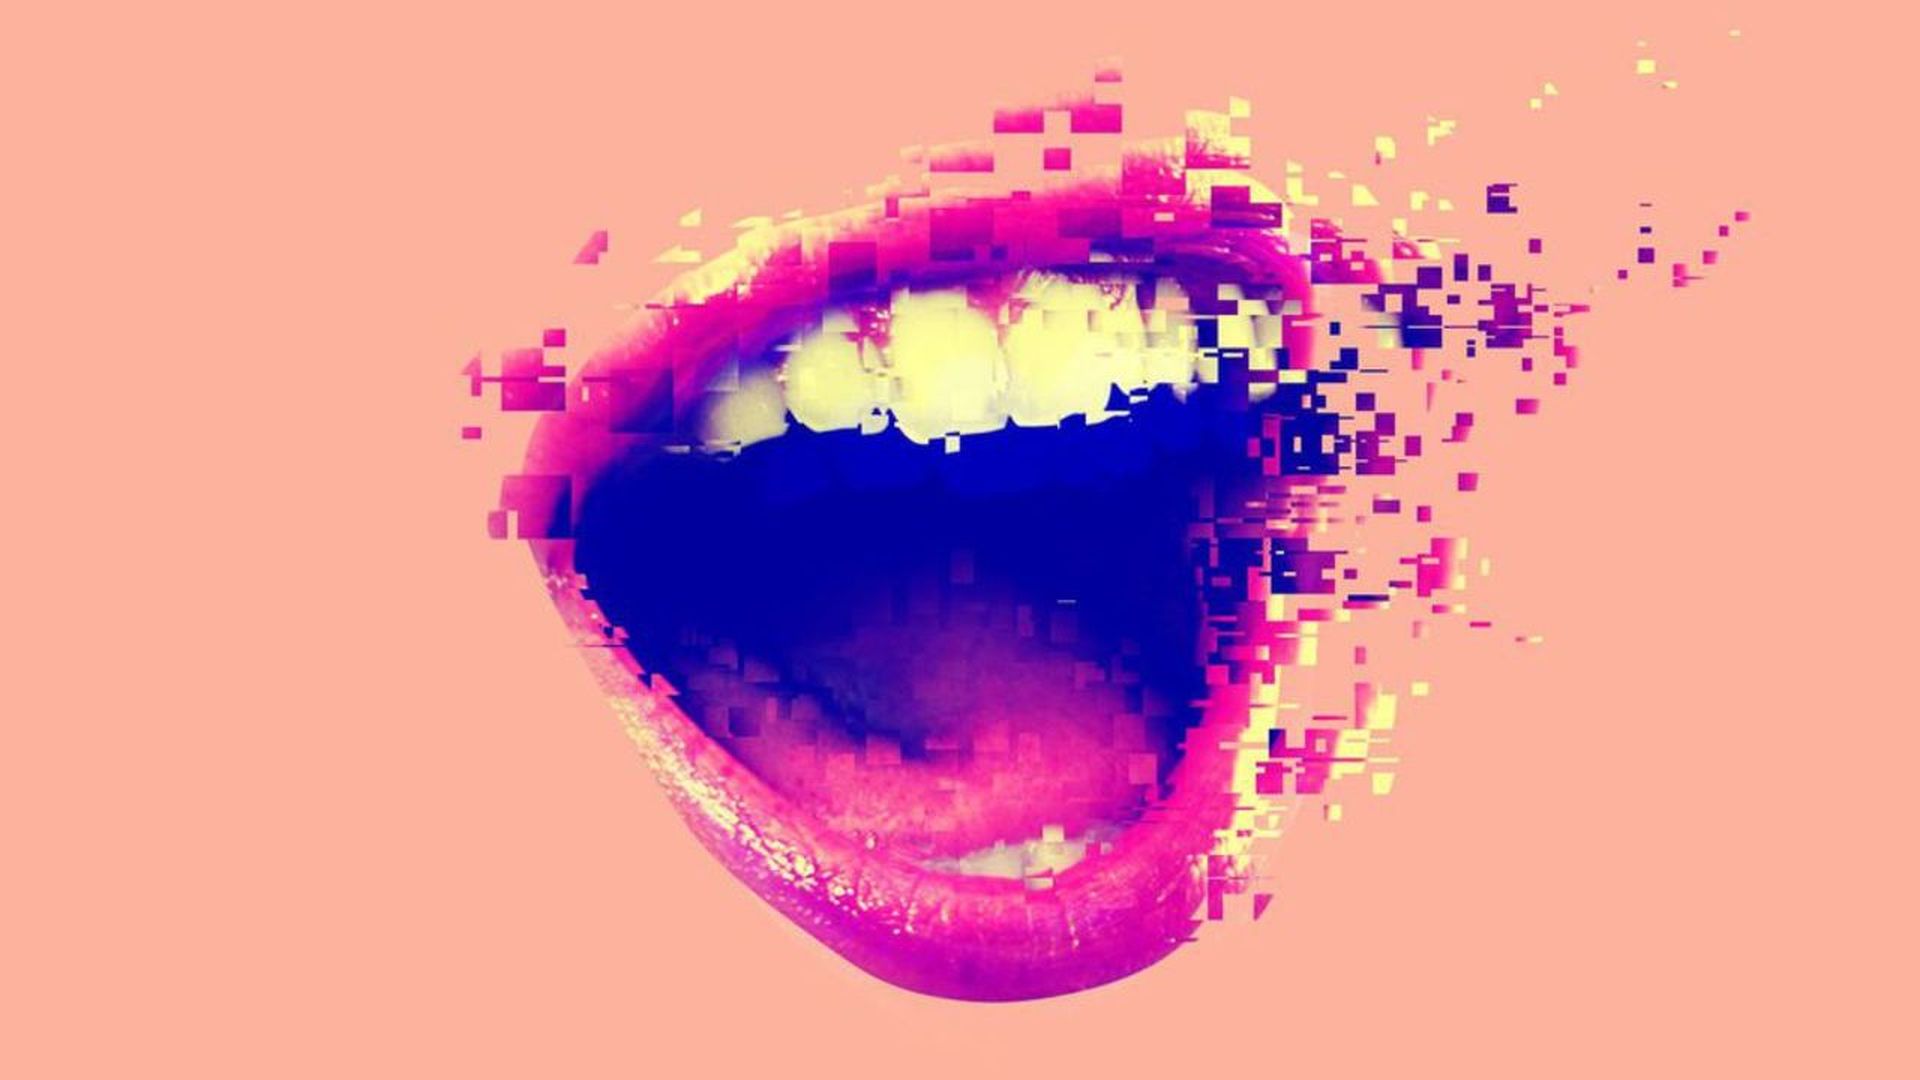 An illustration of a mouth pixelated 